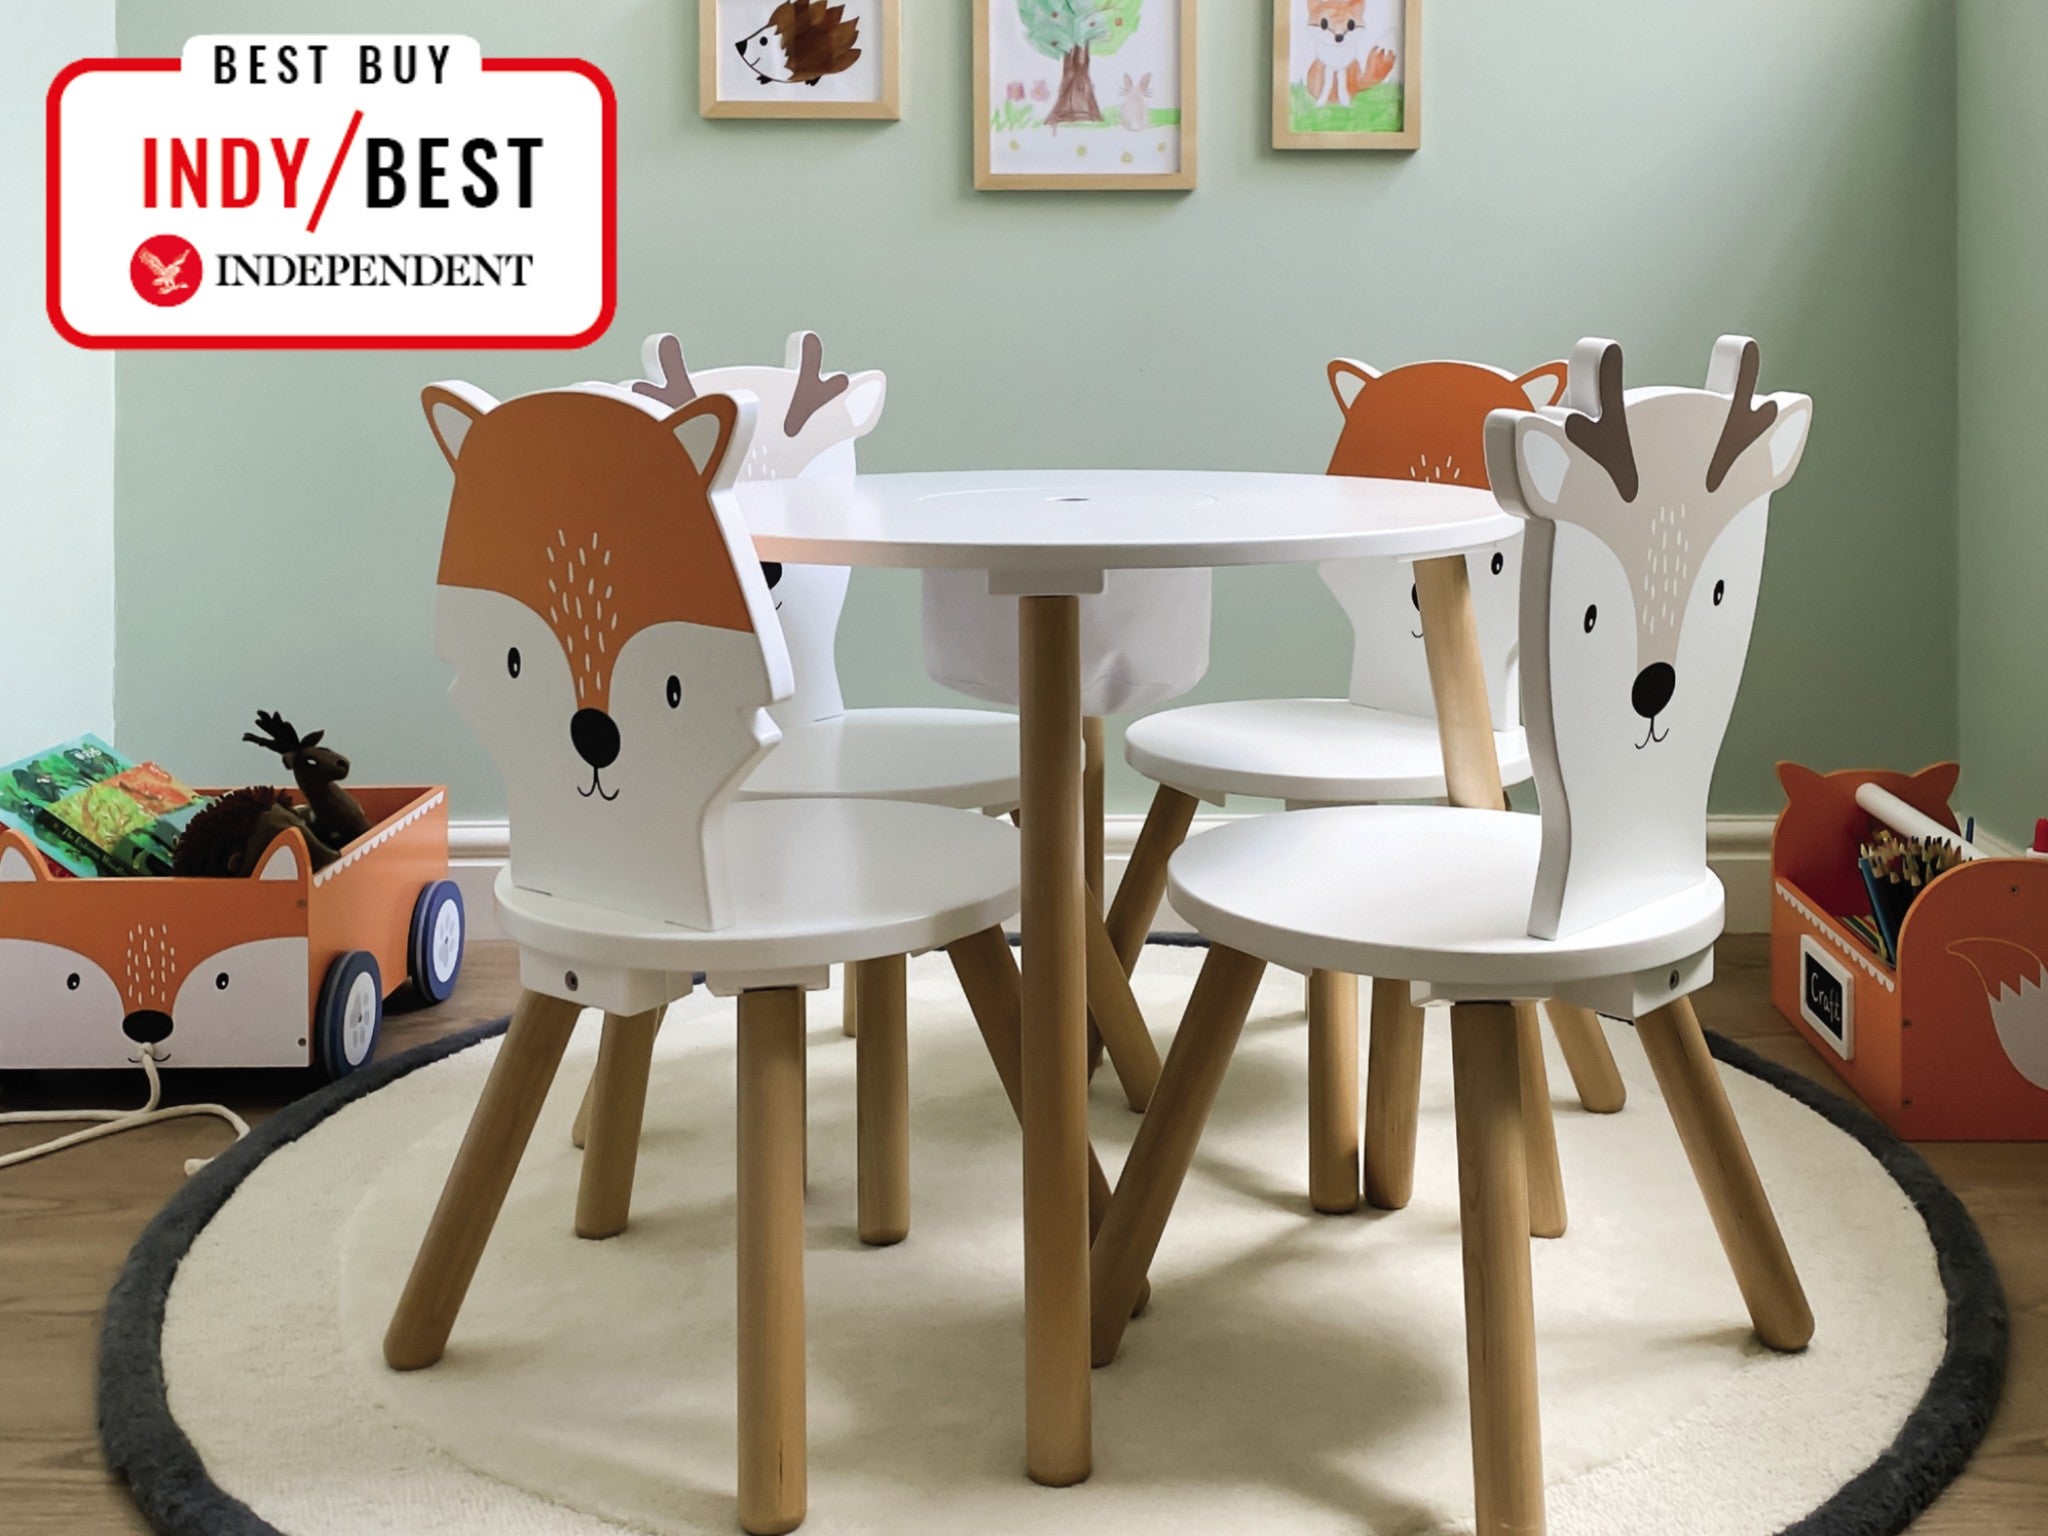 Child Kids Plastic Table And Chair Set Activity Toddler Toy Play Home Furniture 